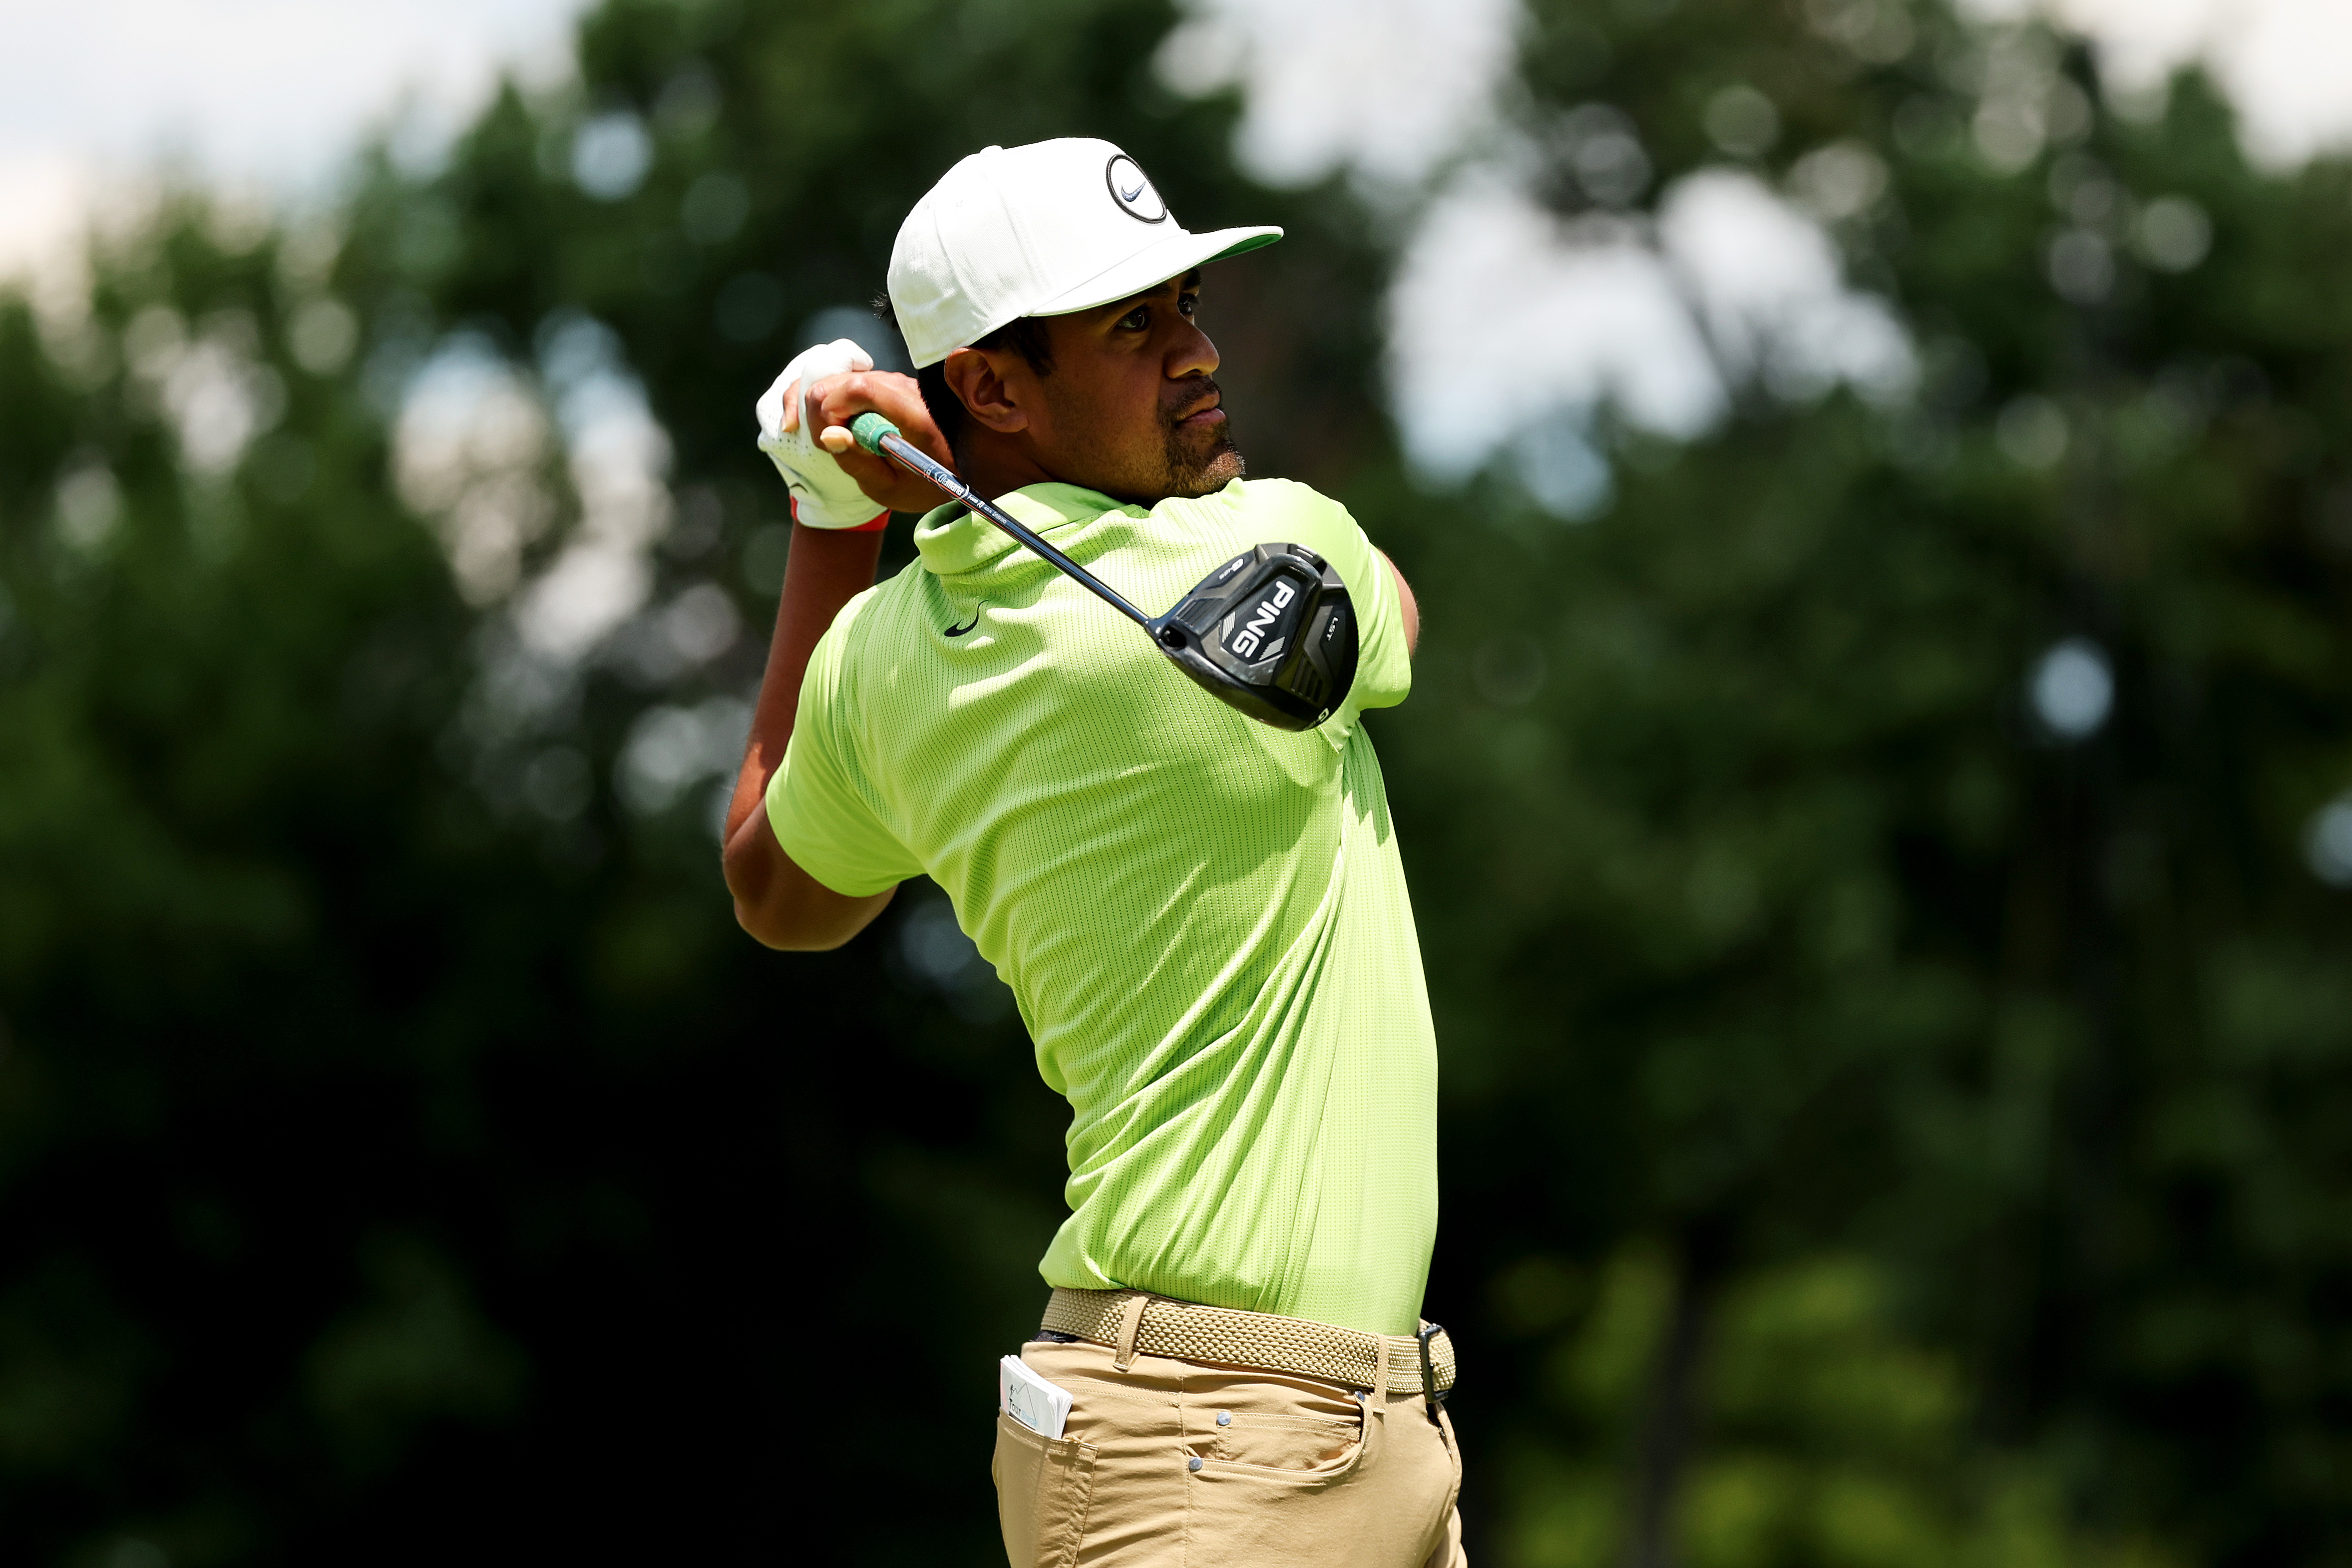 The clubs Tony Finau used to win the 2022 Rocket Mortgage Classic Golf Equipment Clubs, Balls, Bags Golf Digest